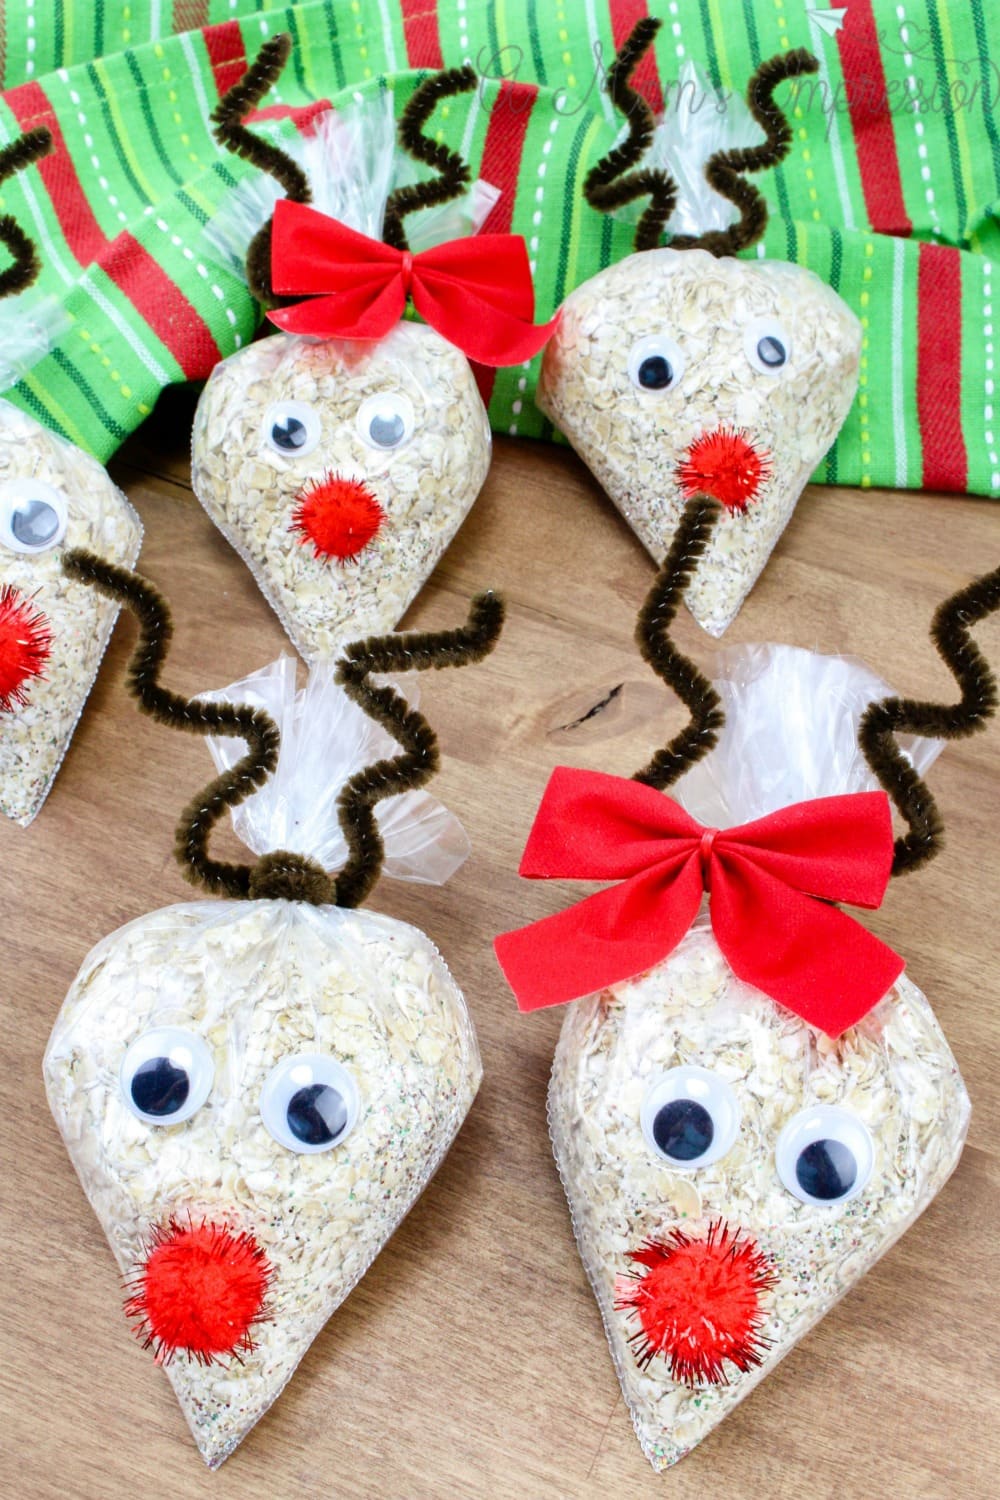 this oatmeal reindeer food recipe looks great in these fun rudolph bags!